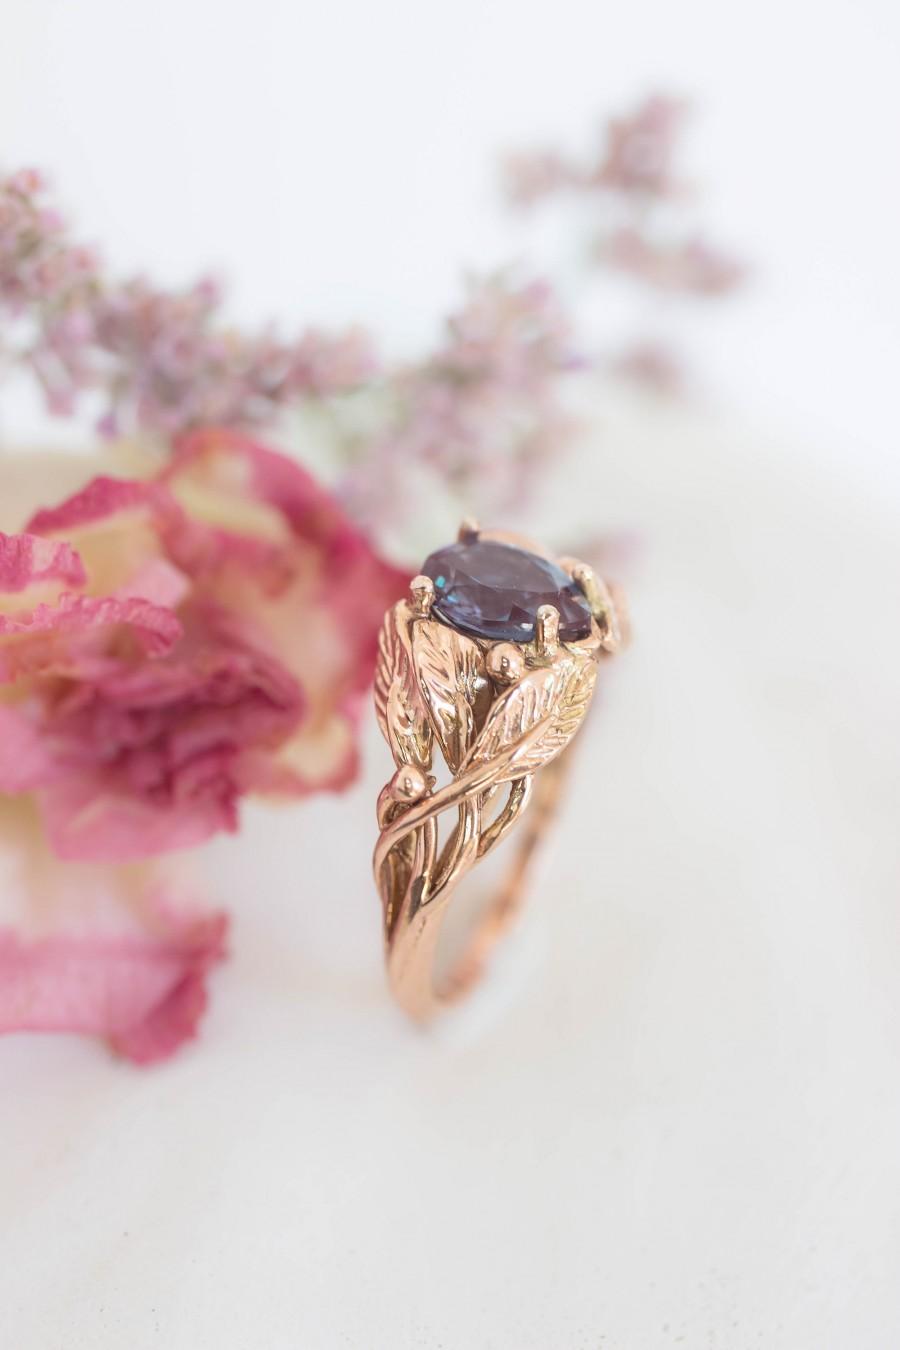 Wedding - Pear cut alexandrite engagement ring, wedding ring for woman, leaves ring, nature jewelry, leaf ring, teardrop ring, colour change, 14K gold